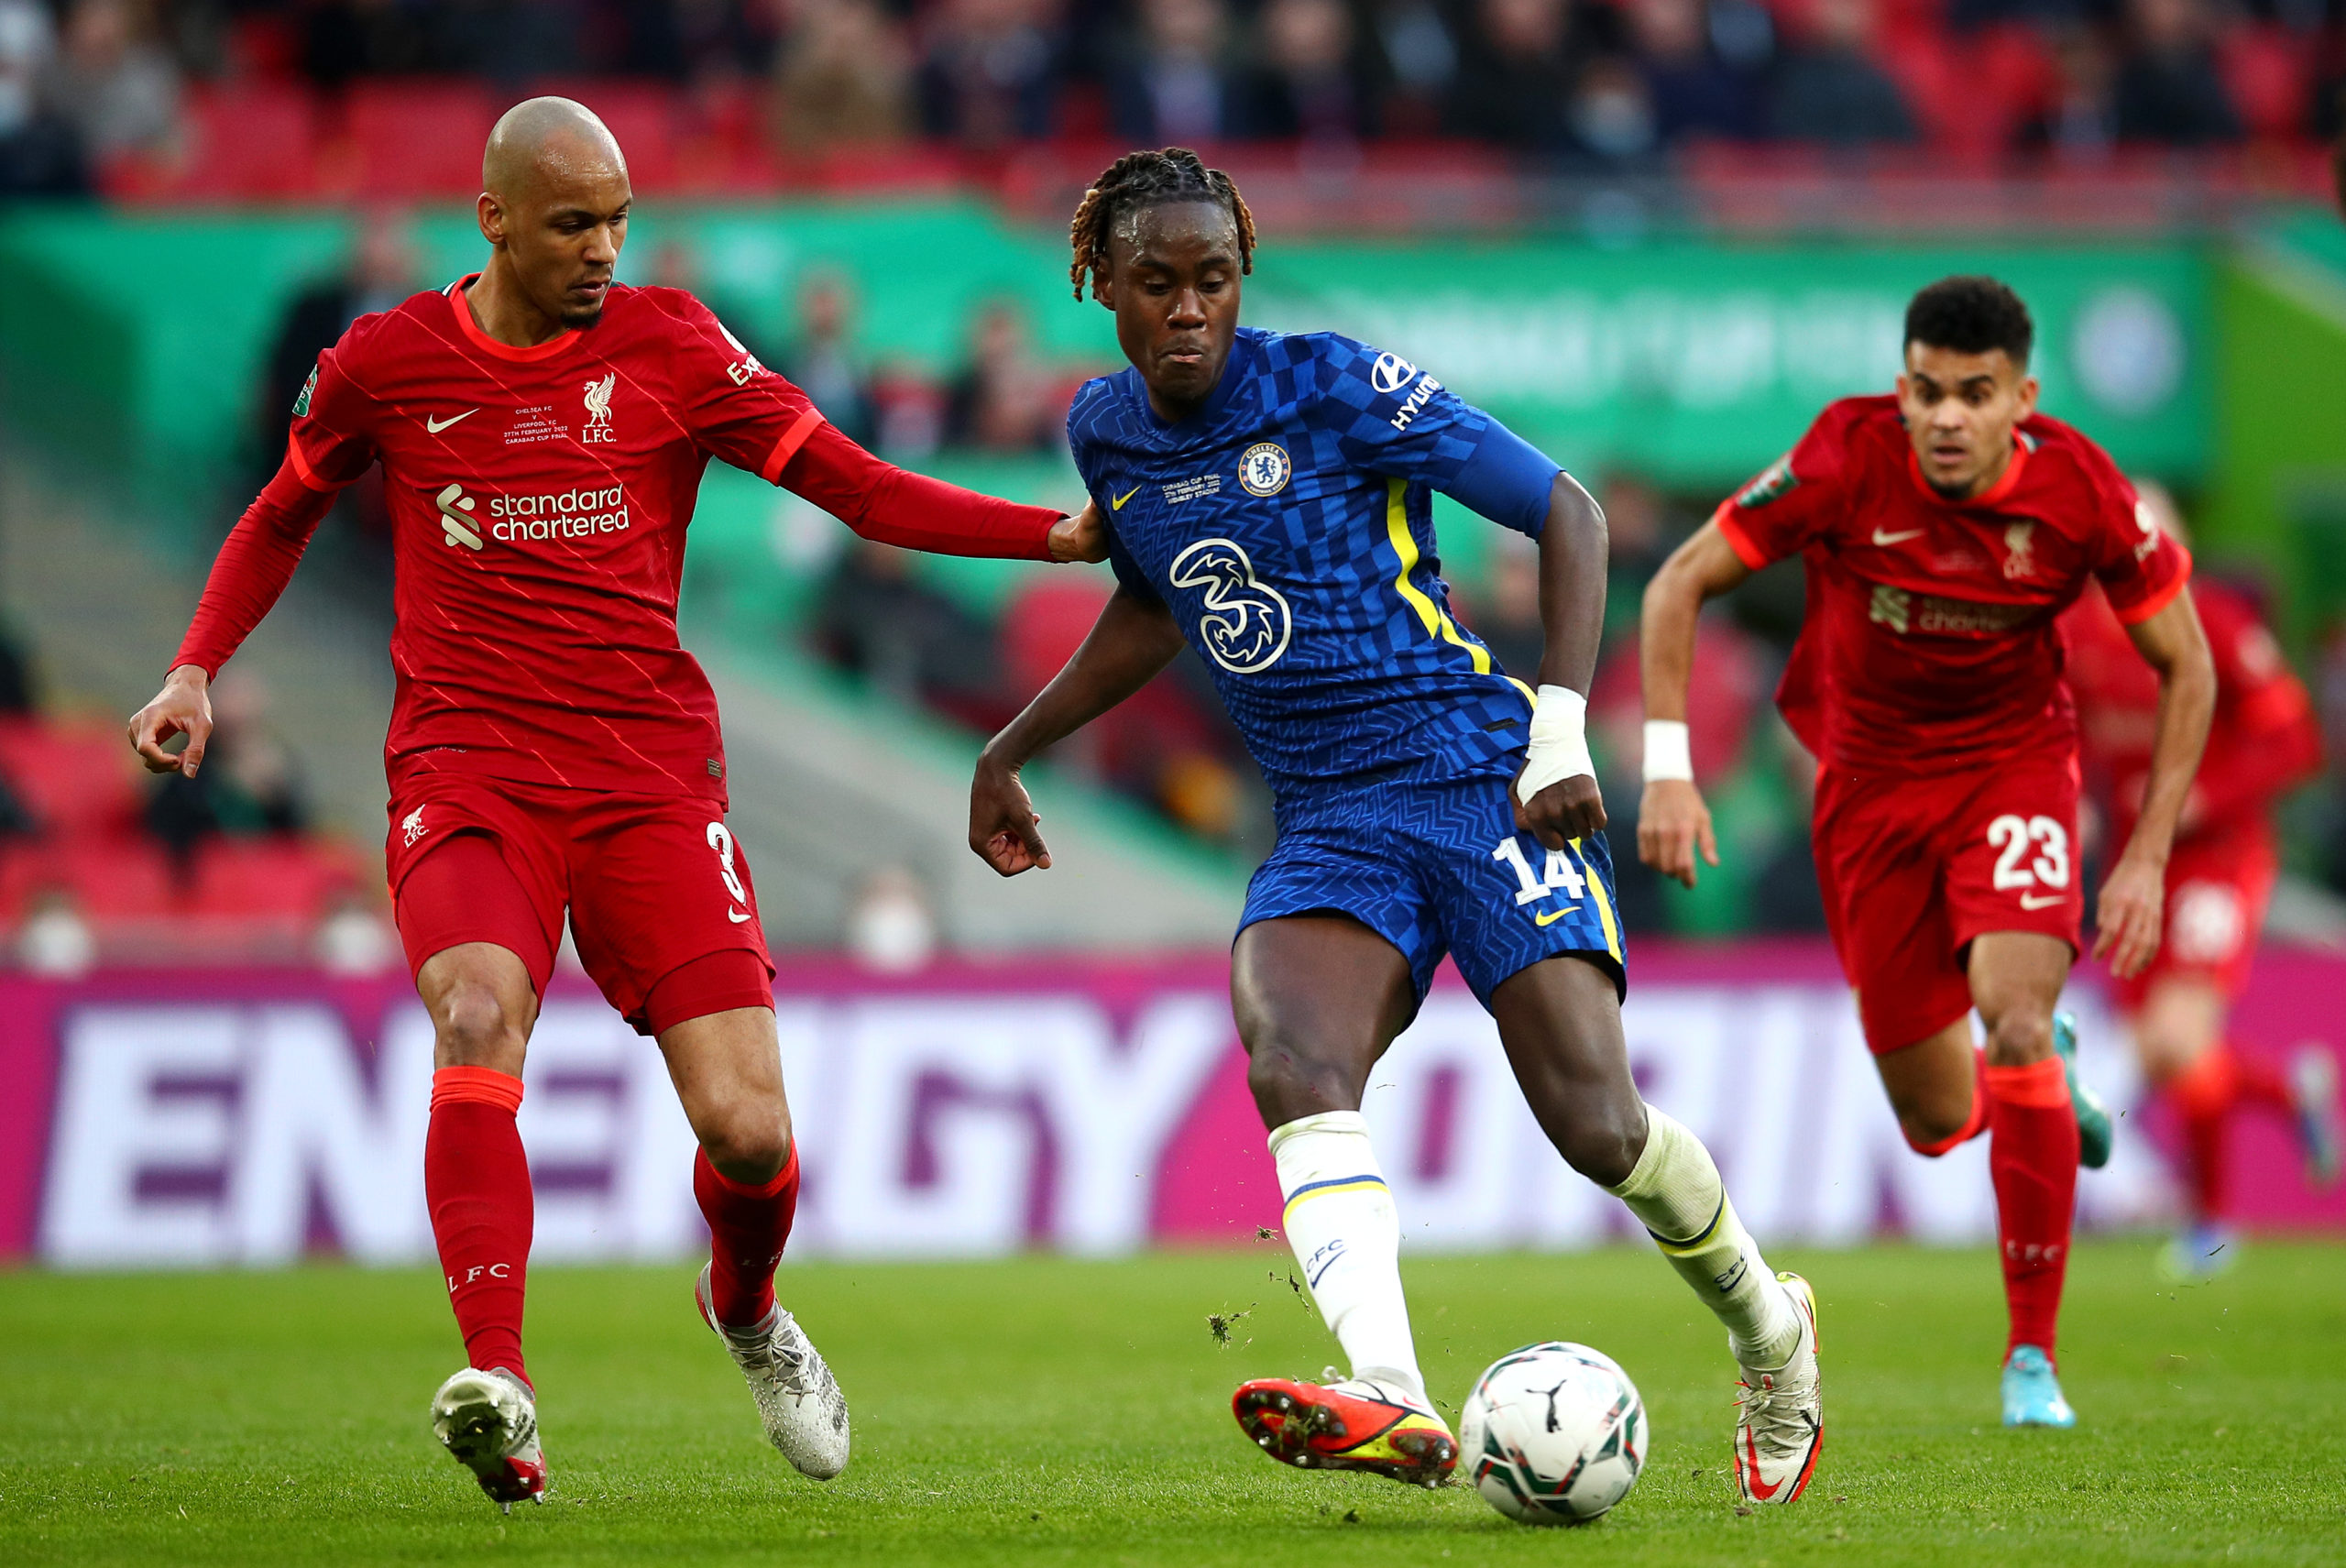 Trevoh Chalobah's brother posts message on social media after Chelsea's Carabao Cup final yesterday